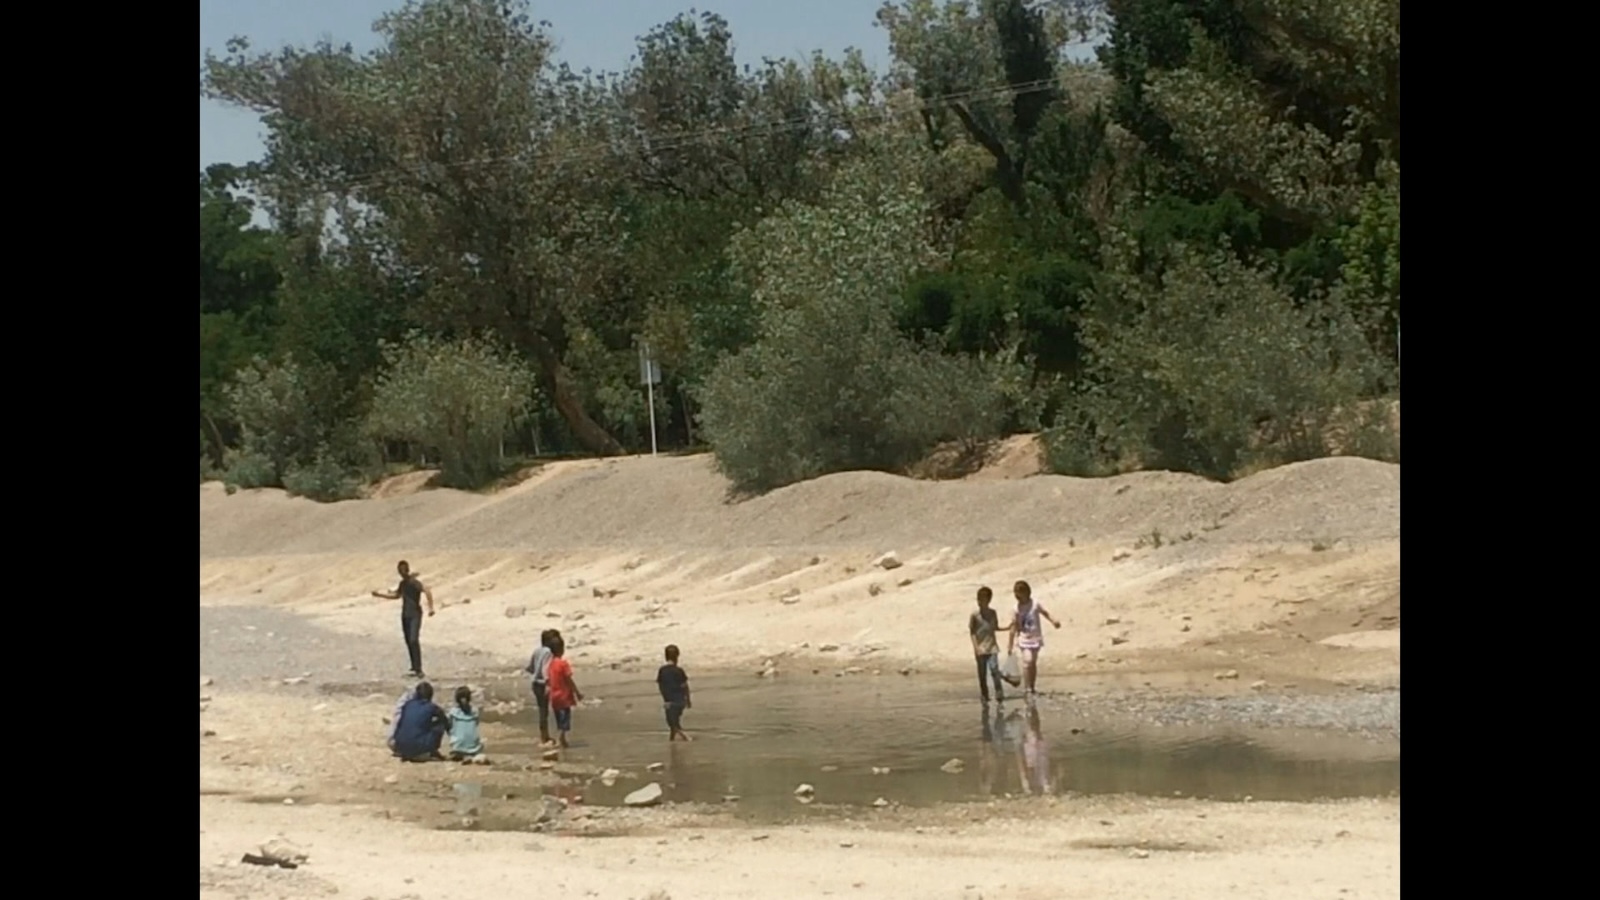 A group of children stand in a shallow reservoir of water in a parched landscape